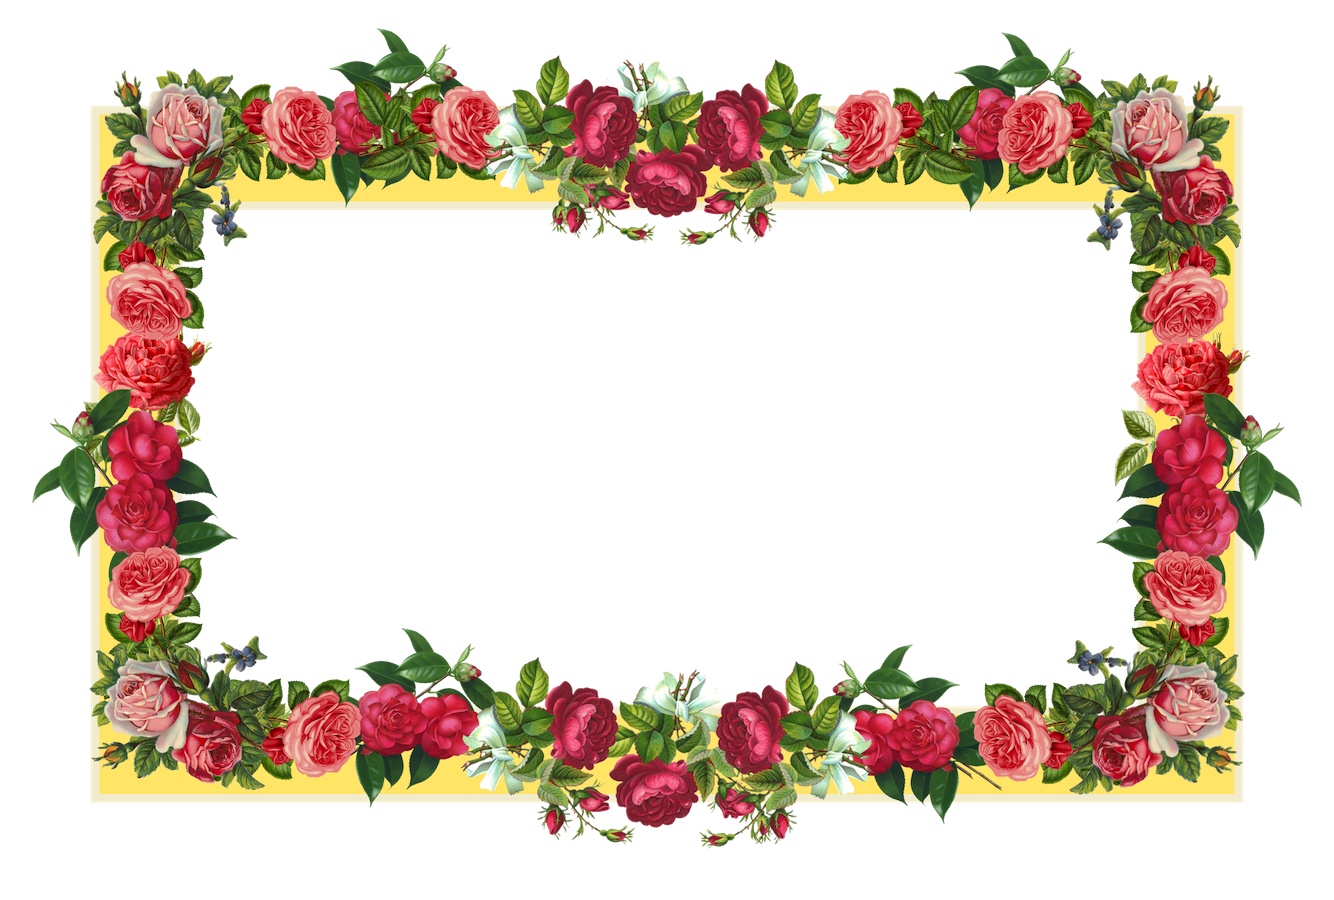 Flowers Borders Png Images PNG Image